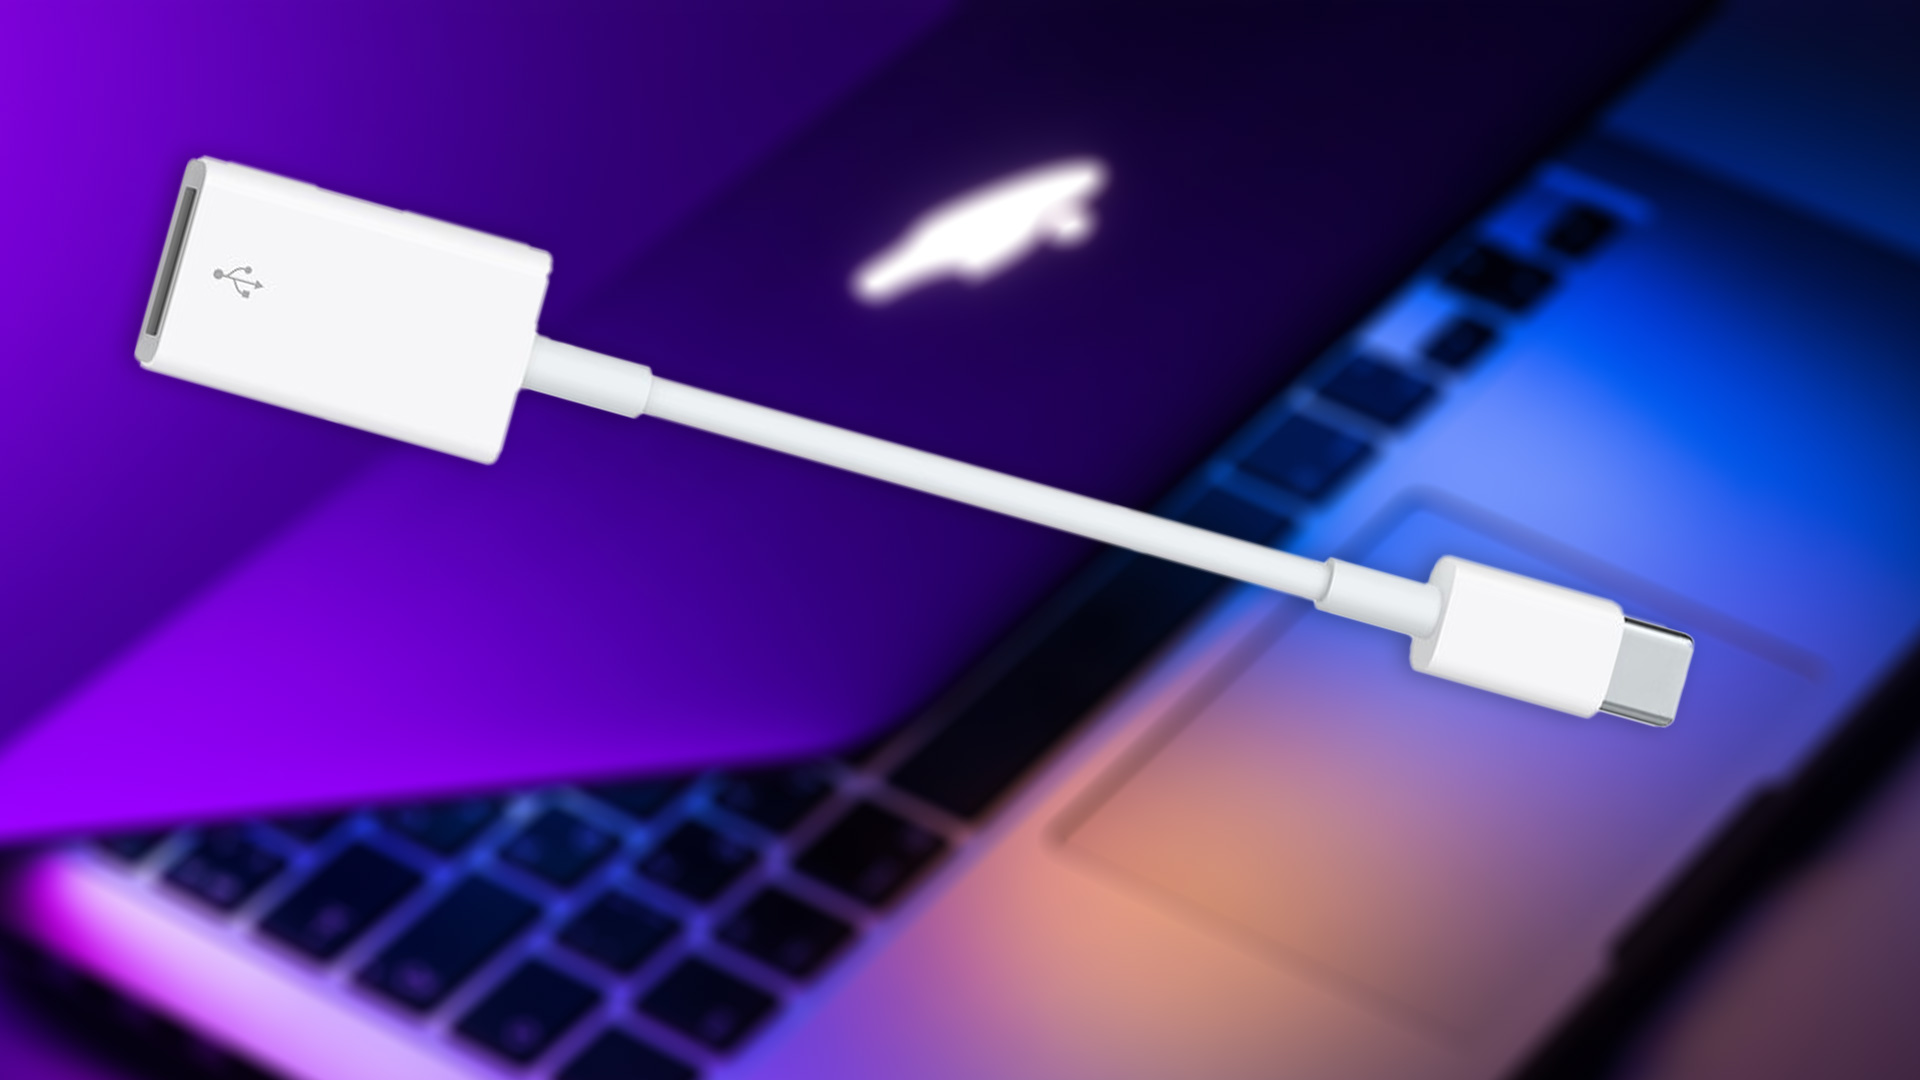 Ensure that the USB drive is properly plugged into the USB port.
Try connecting the USB drive to a different USB port on your Mac.